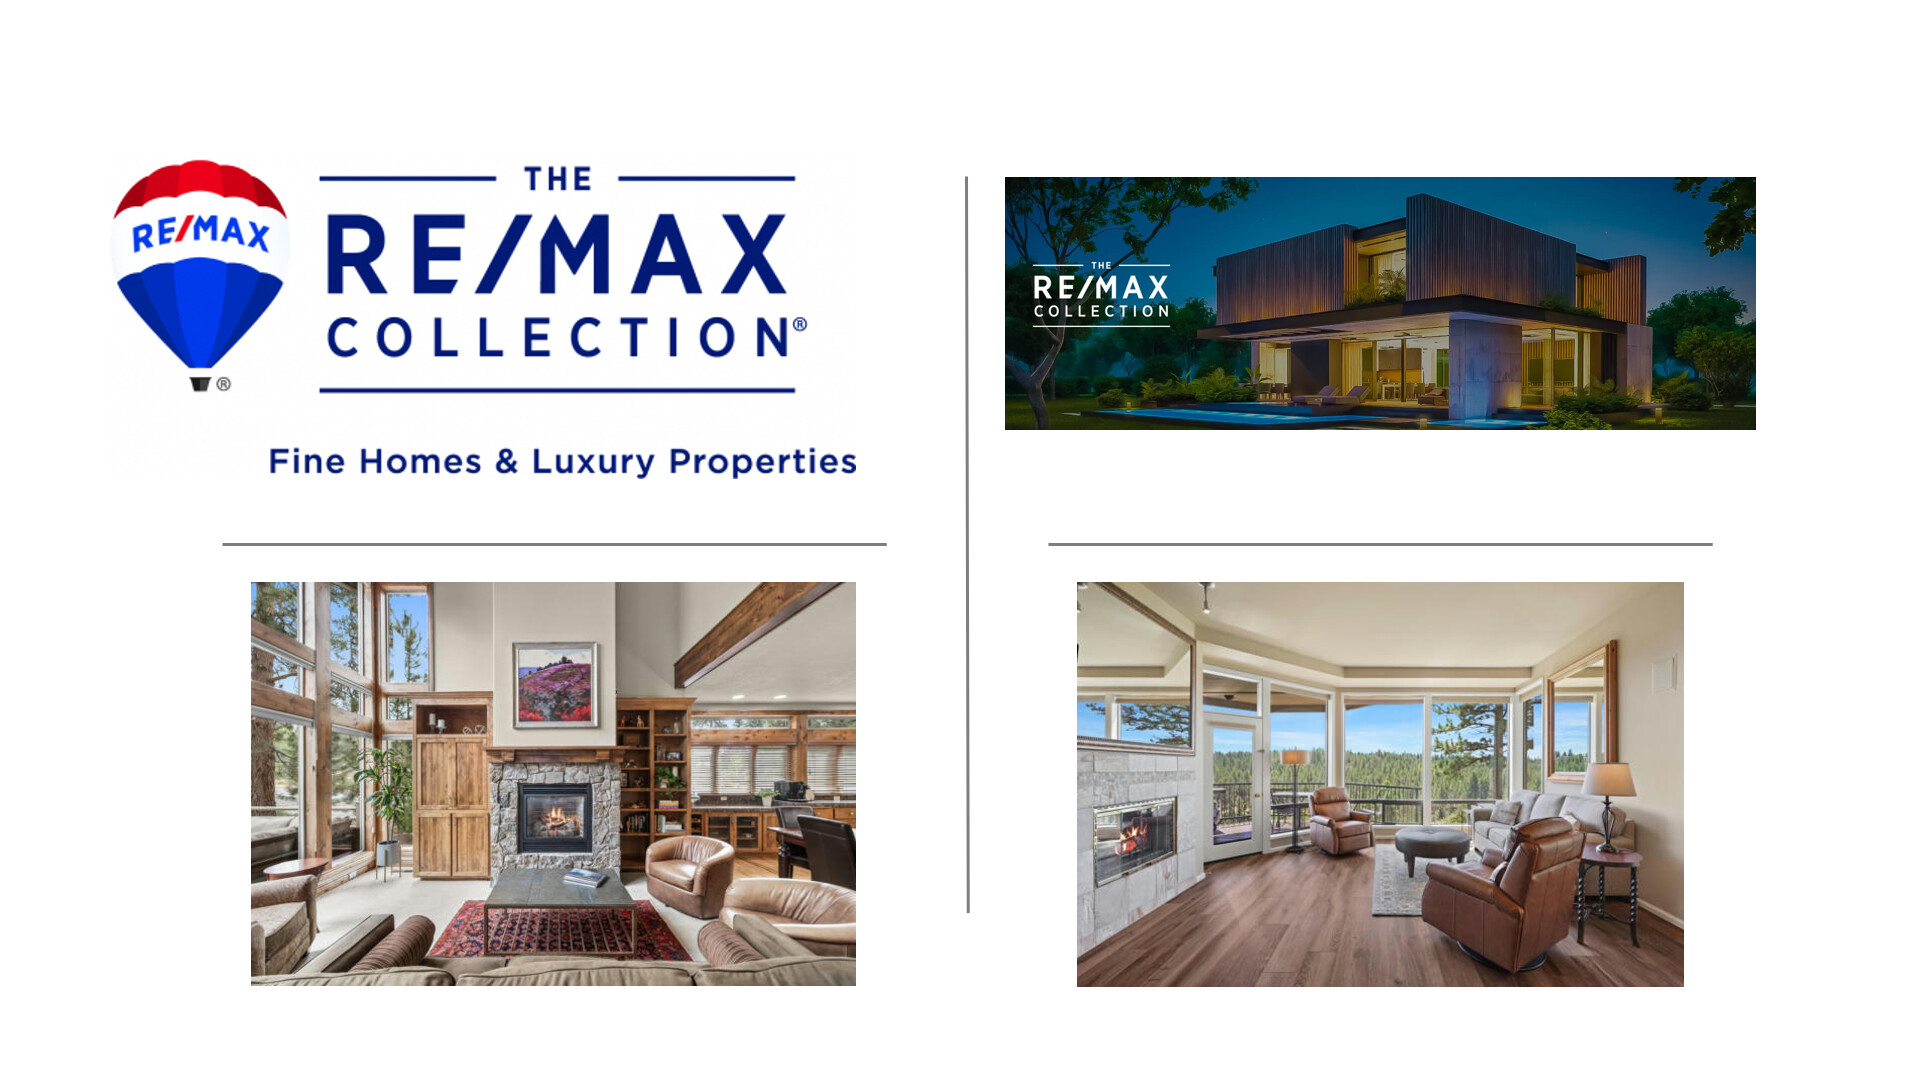 REMAX IMMOBILIEN_THE LUXURY COLLECTION_1